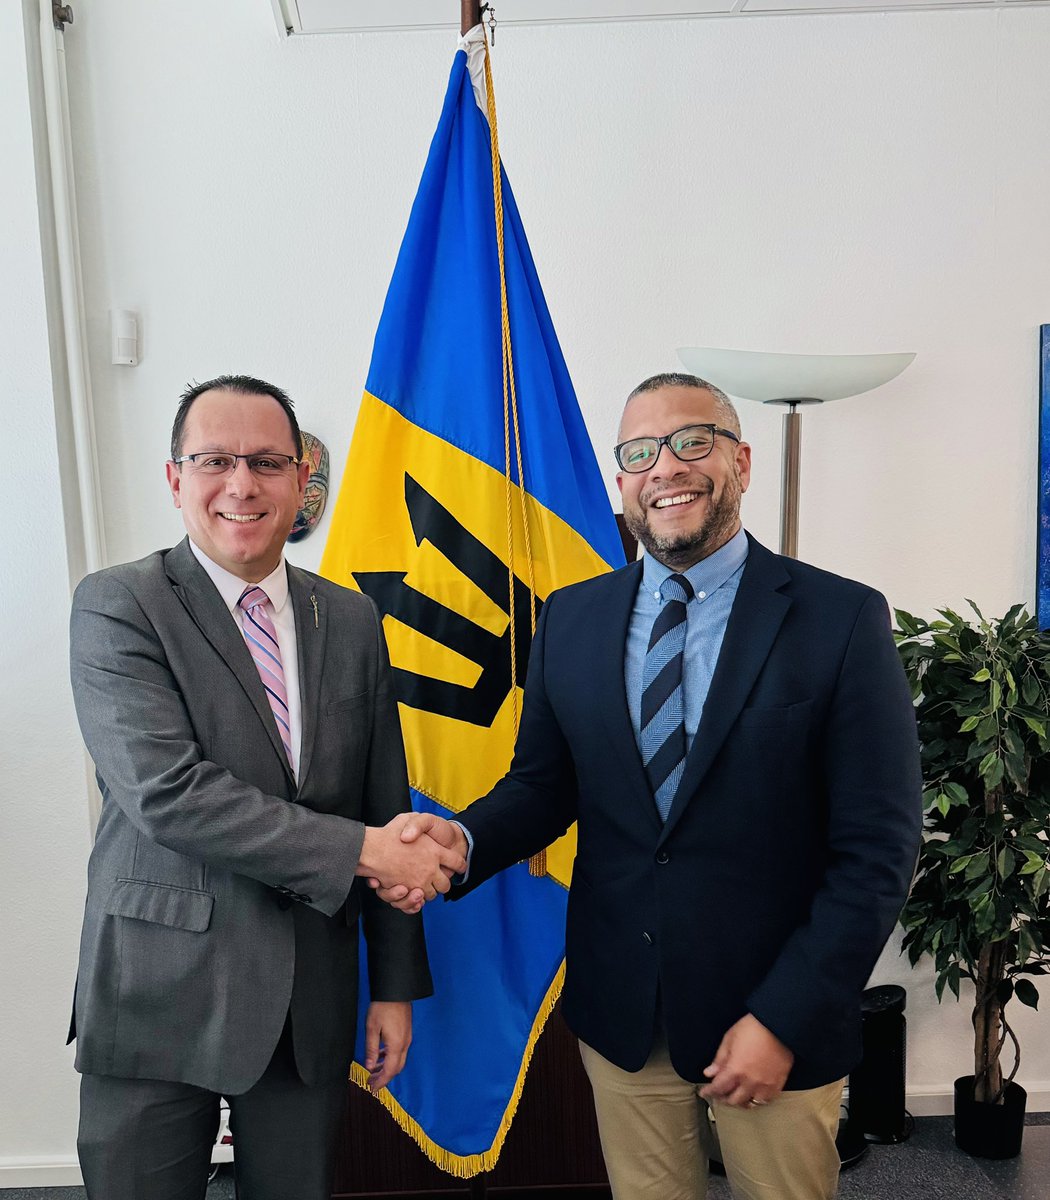 Pleasure to meet Venezuela Embajador Alexander Yánez @alexanderyd2030 to welcome him to Geneva & to assure of 🇧🇧 continued partnership with 🇻🇪 on trade and UN-related issues.